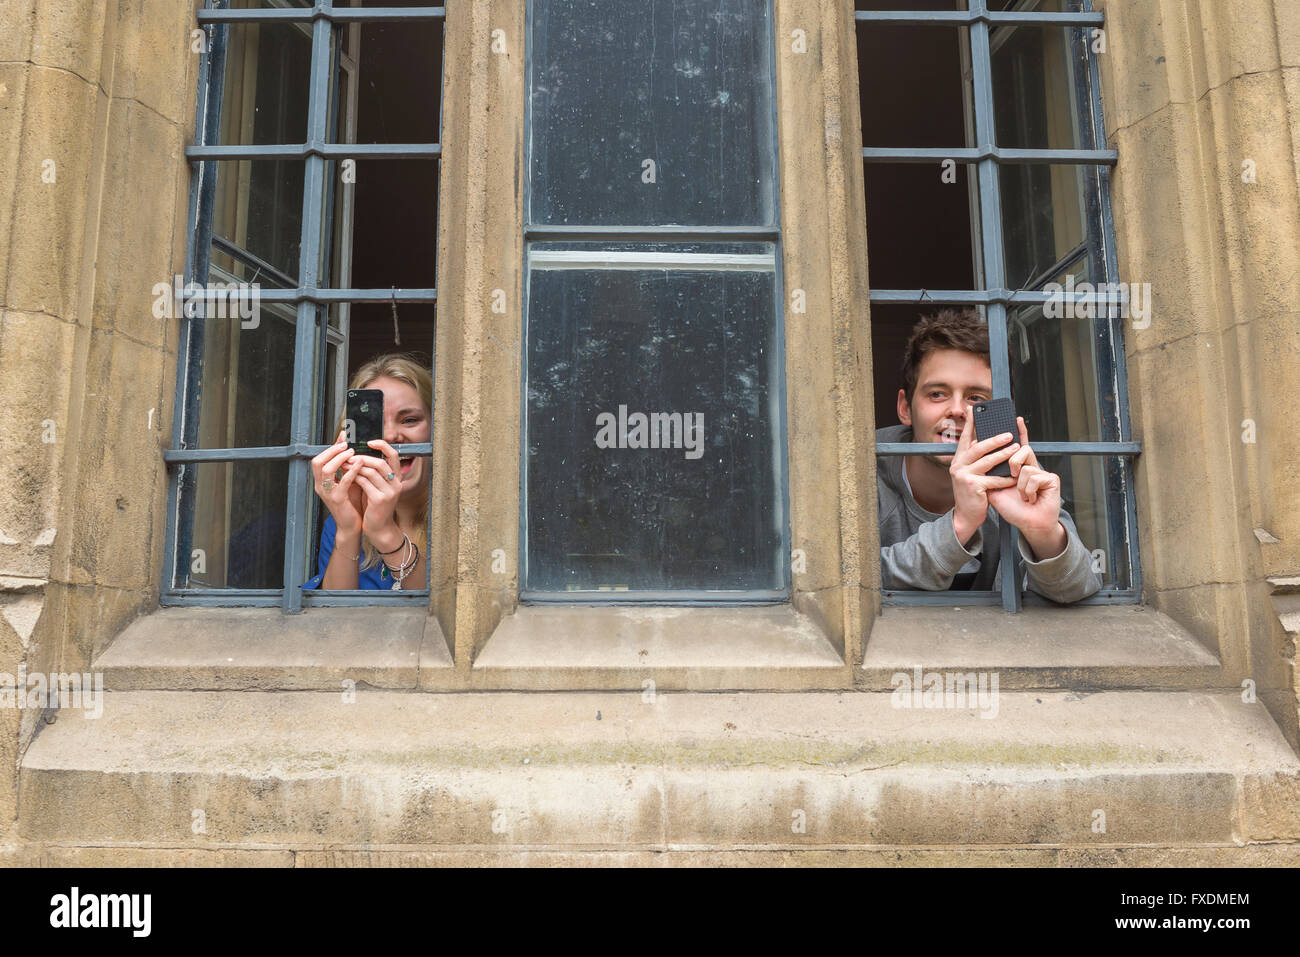 Couple taking photo, view of two Cambridge university students in Trinity College taking photos from an upstairs window, Cambridge, UK Stock Photo